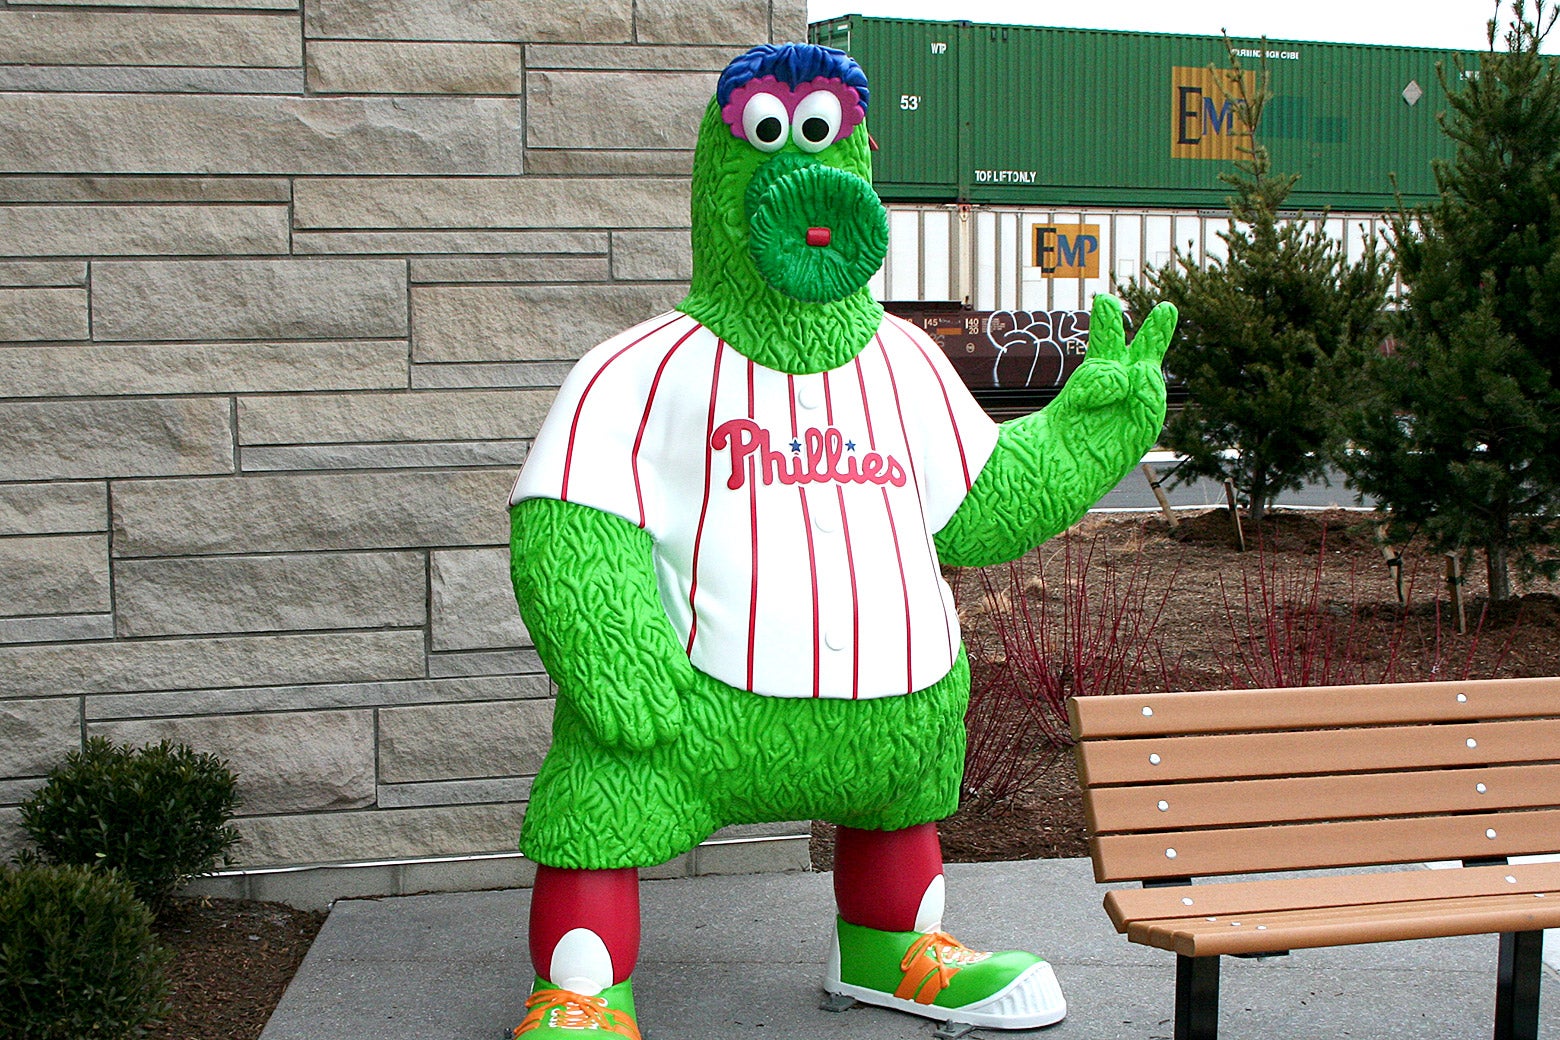 A statue of the Philly Phanatic.